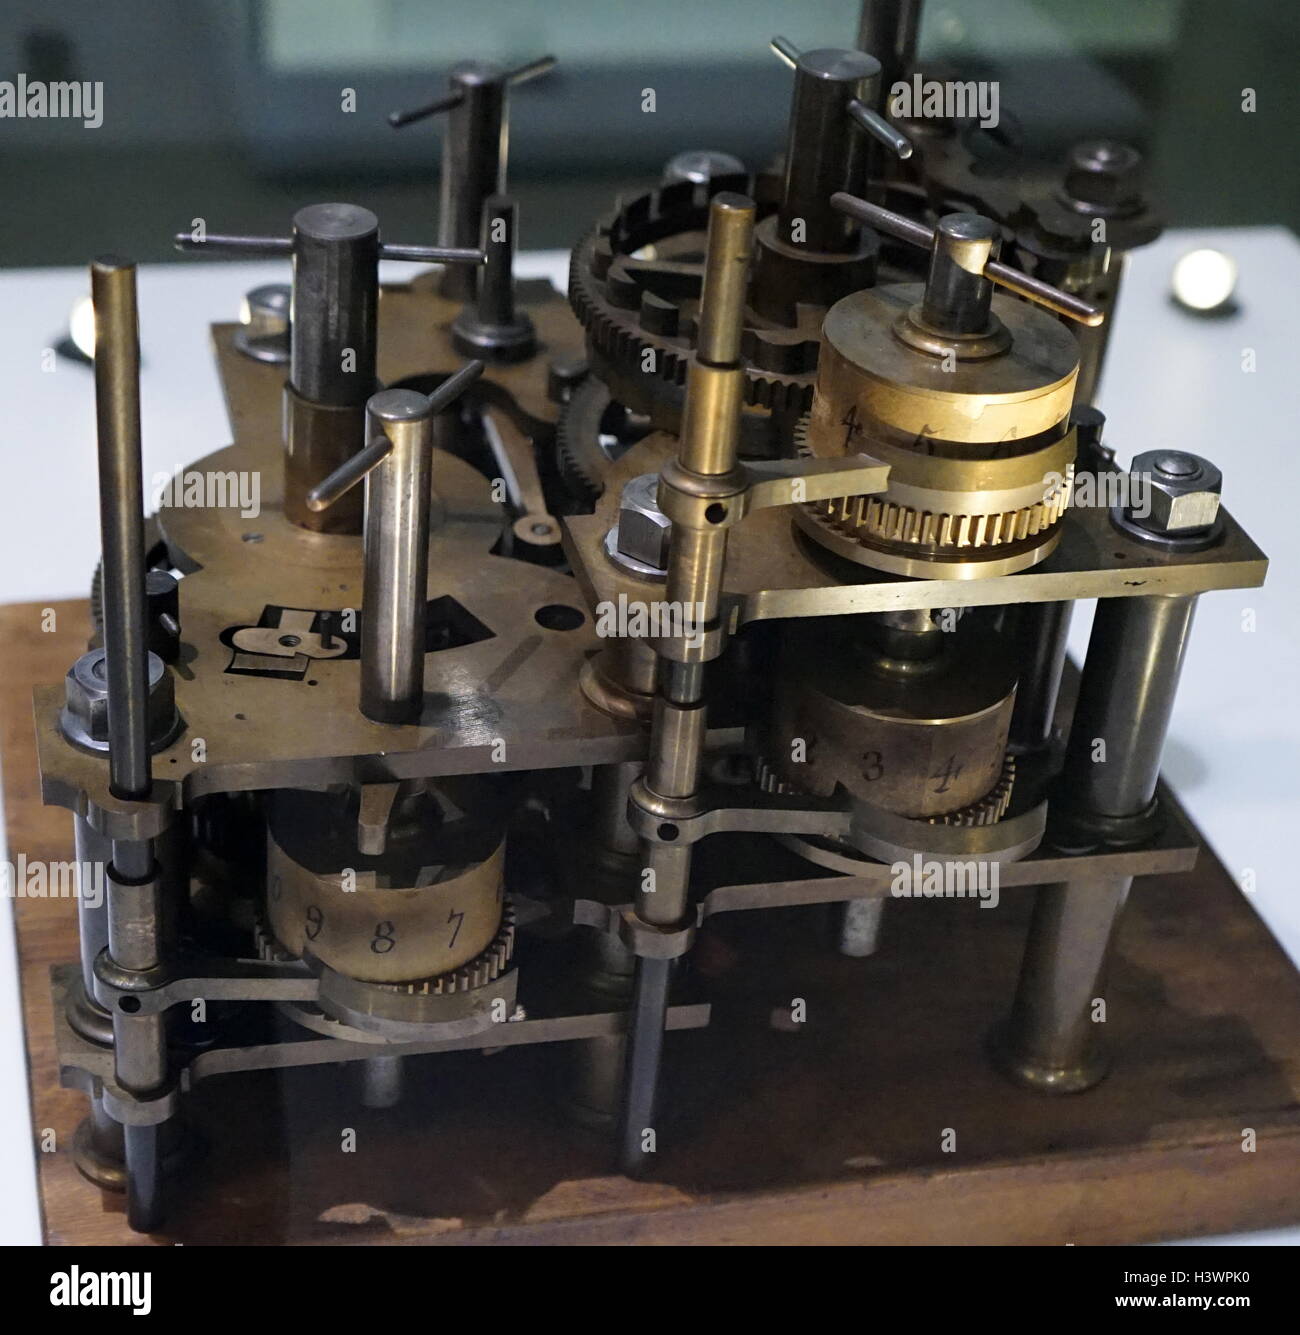 Difference engine, an automatic mechanical calculator designed to tabulate polynomial functions, designed by Charles Babbage (1791-1871) an English polymath, mathematician, philosopher, inventor and mechanical engineer. Dated 19th Century Stock Photo